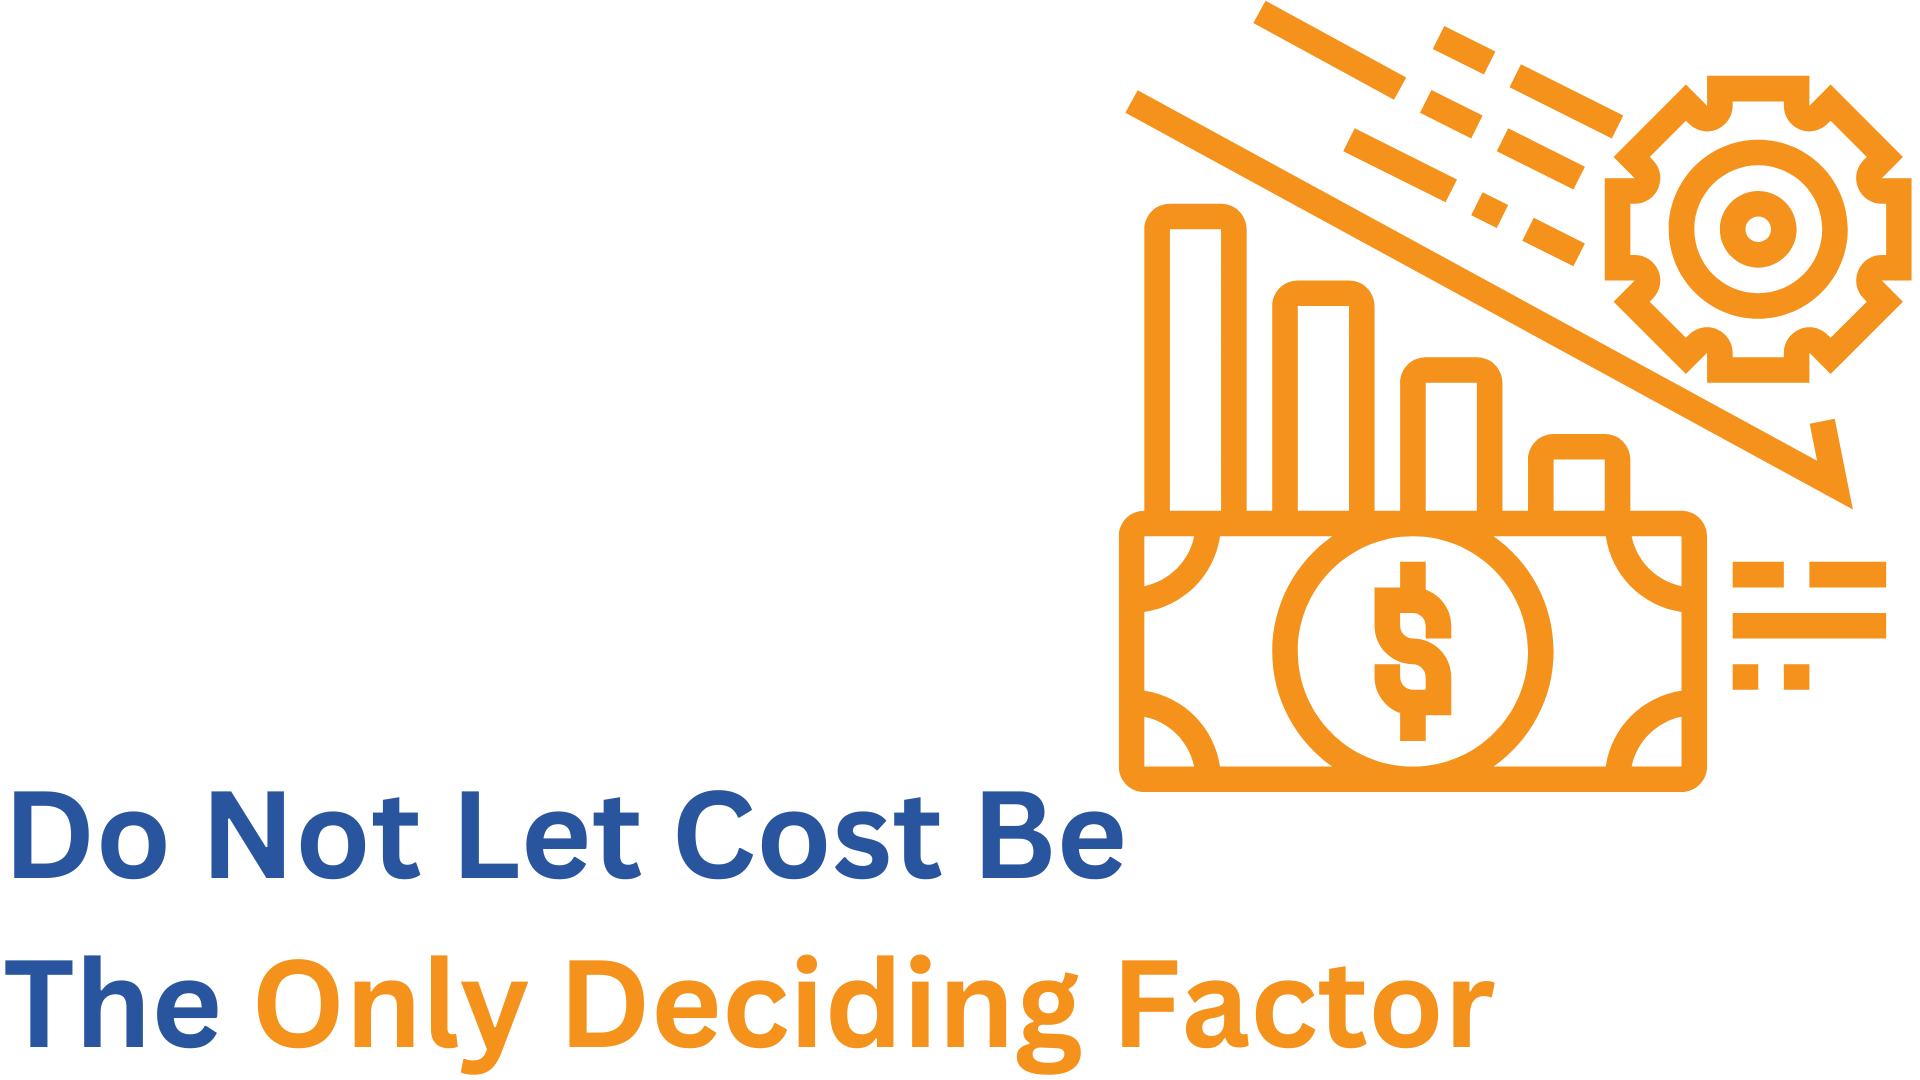 Do Not Let Cost Be The Only Deciding Factor